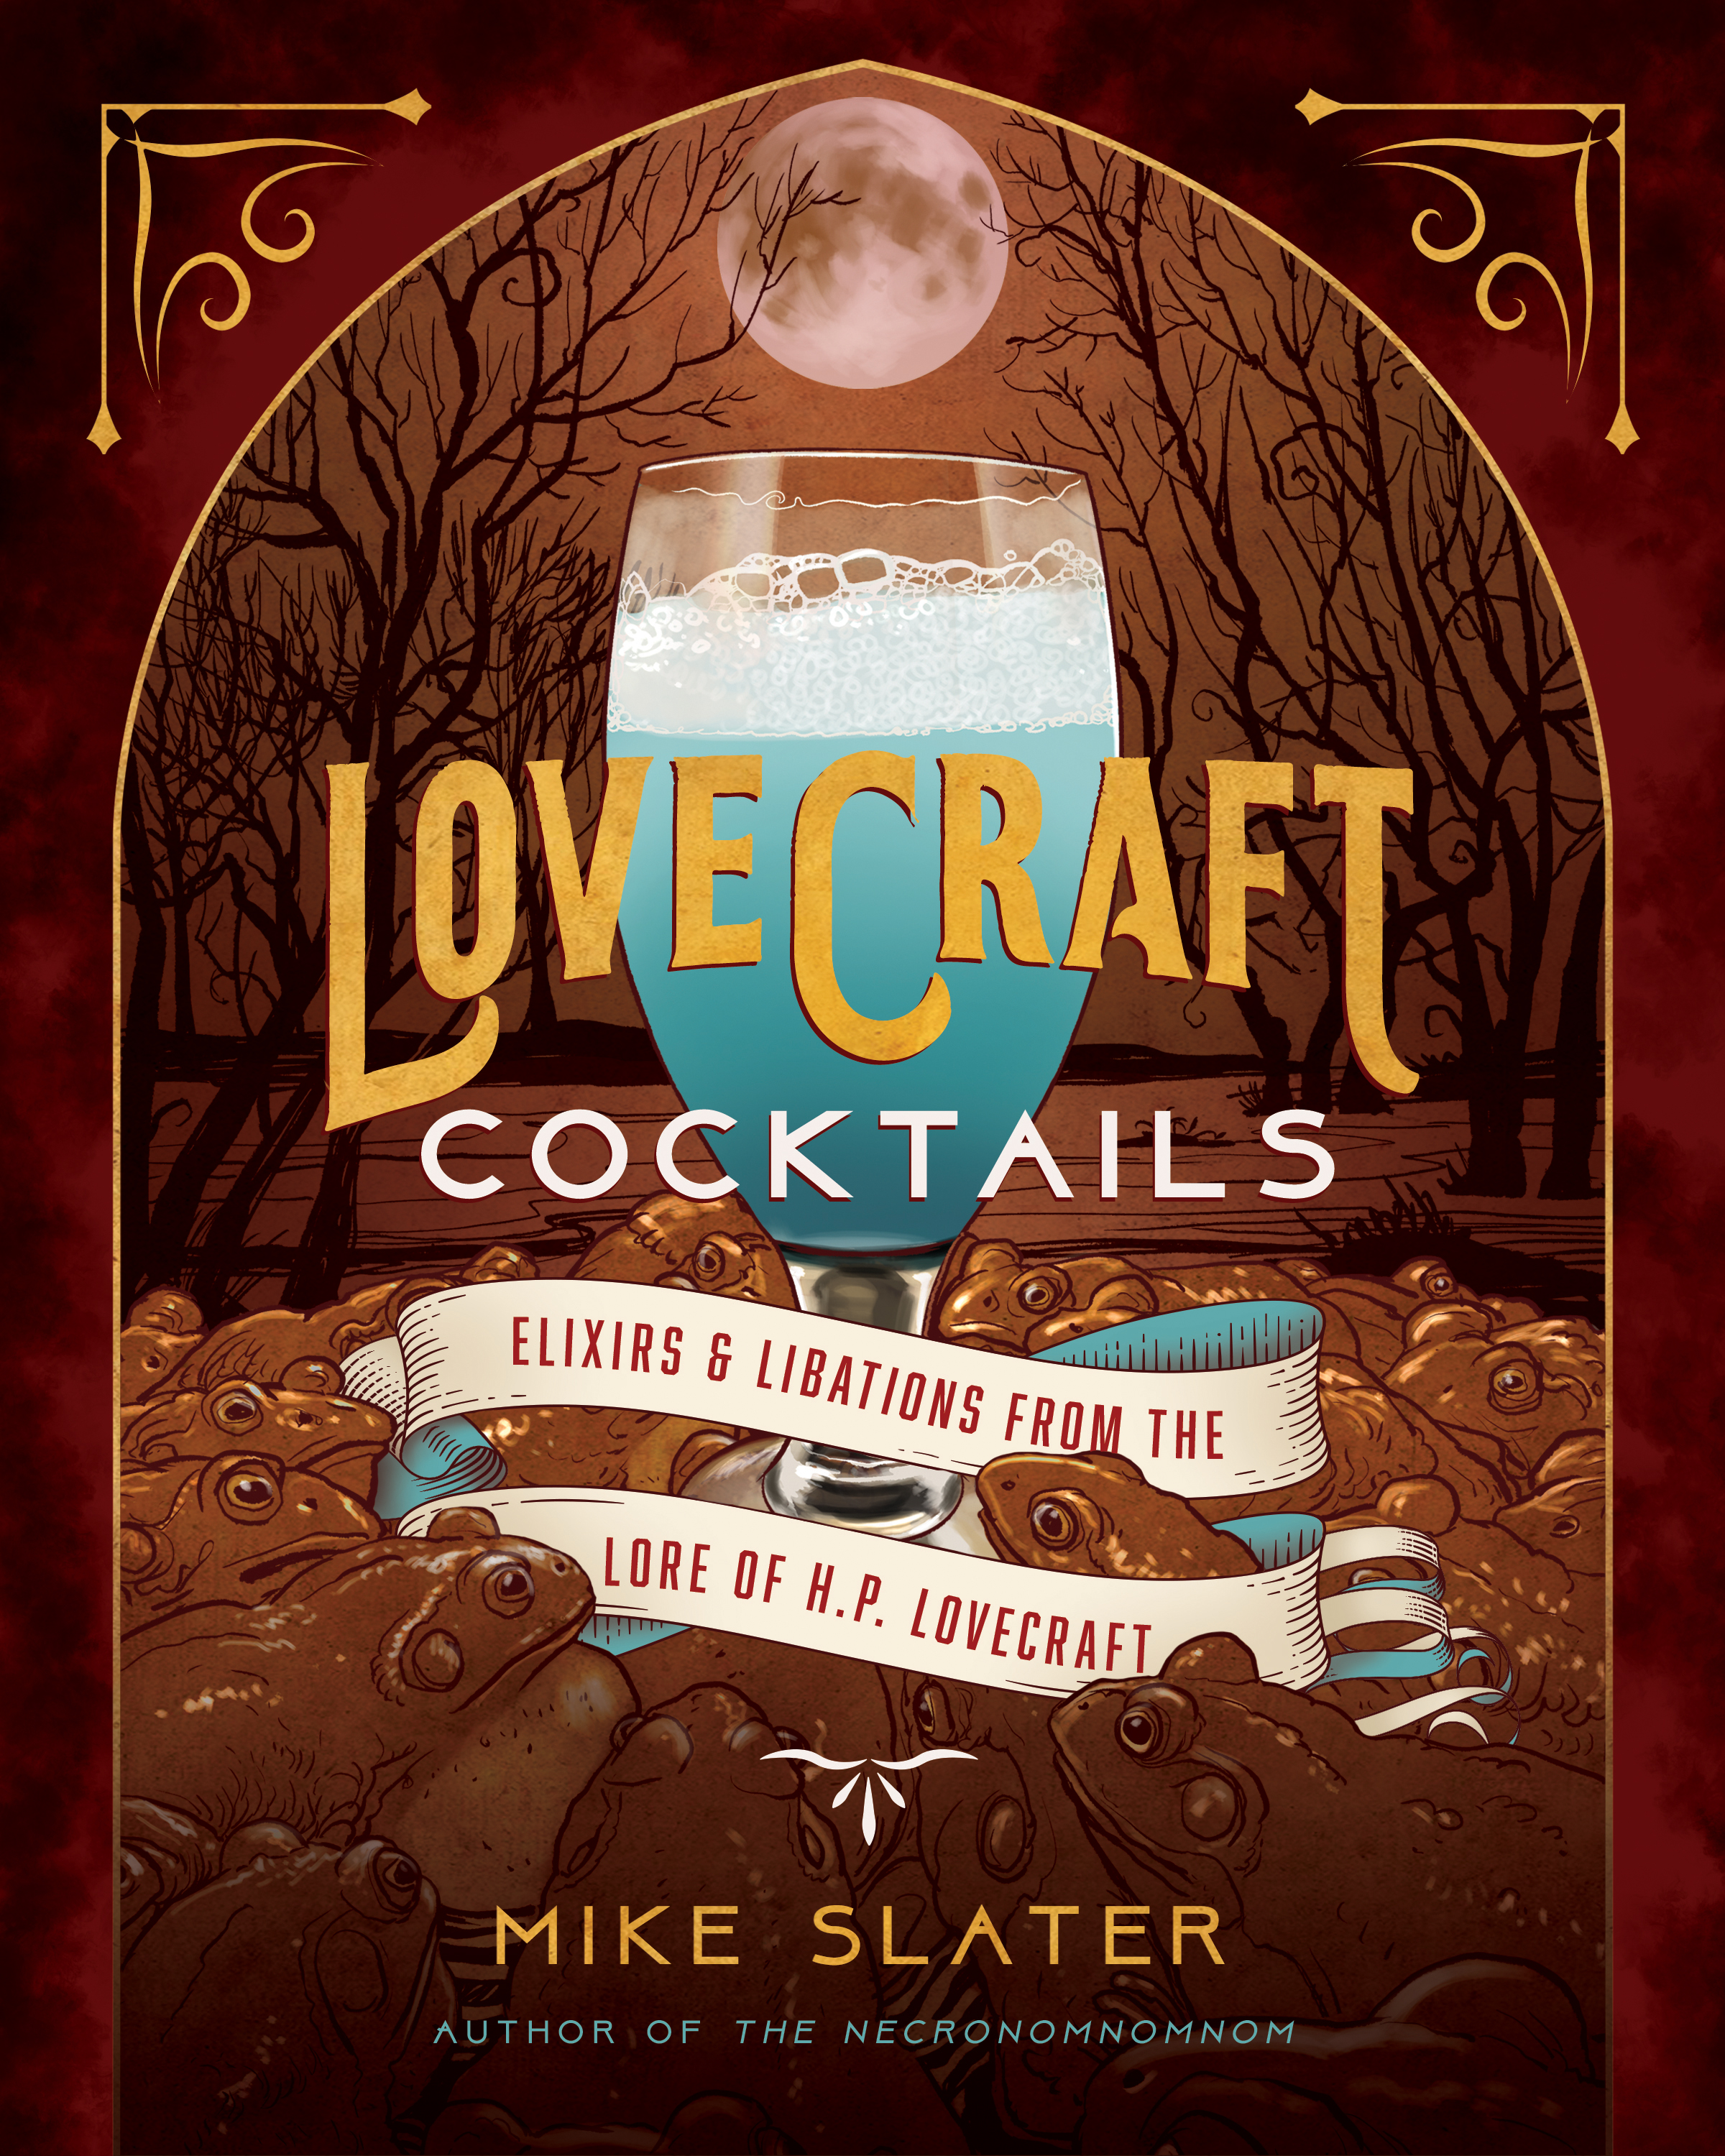 ISBN 9781682686423 product image for Lovecraft Cocktails | upcitemdb.com